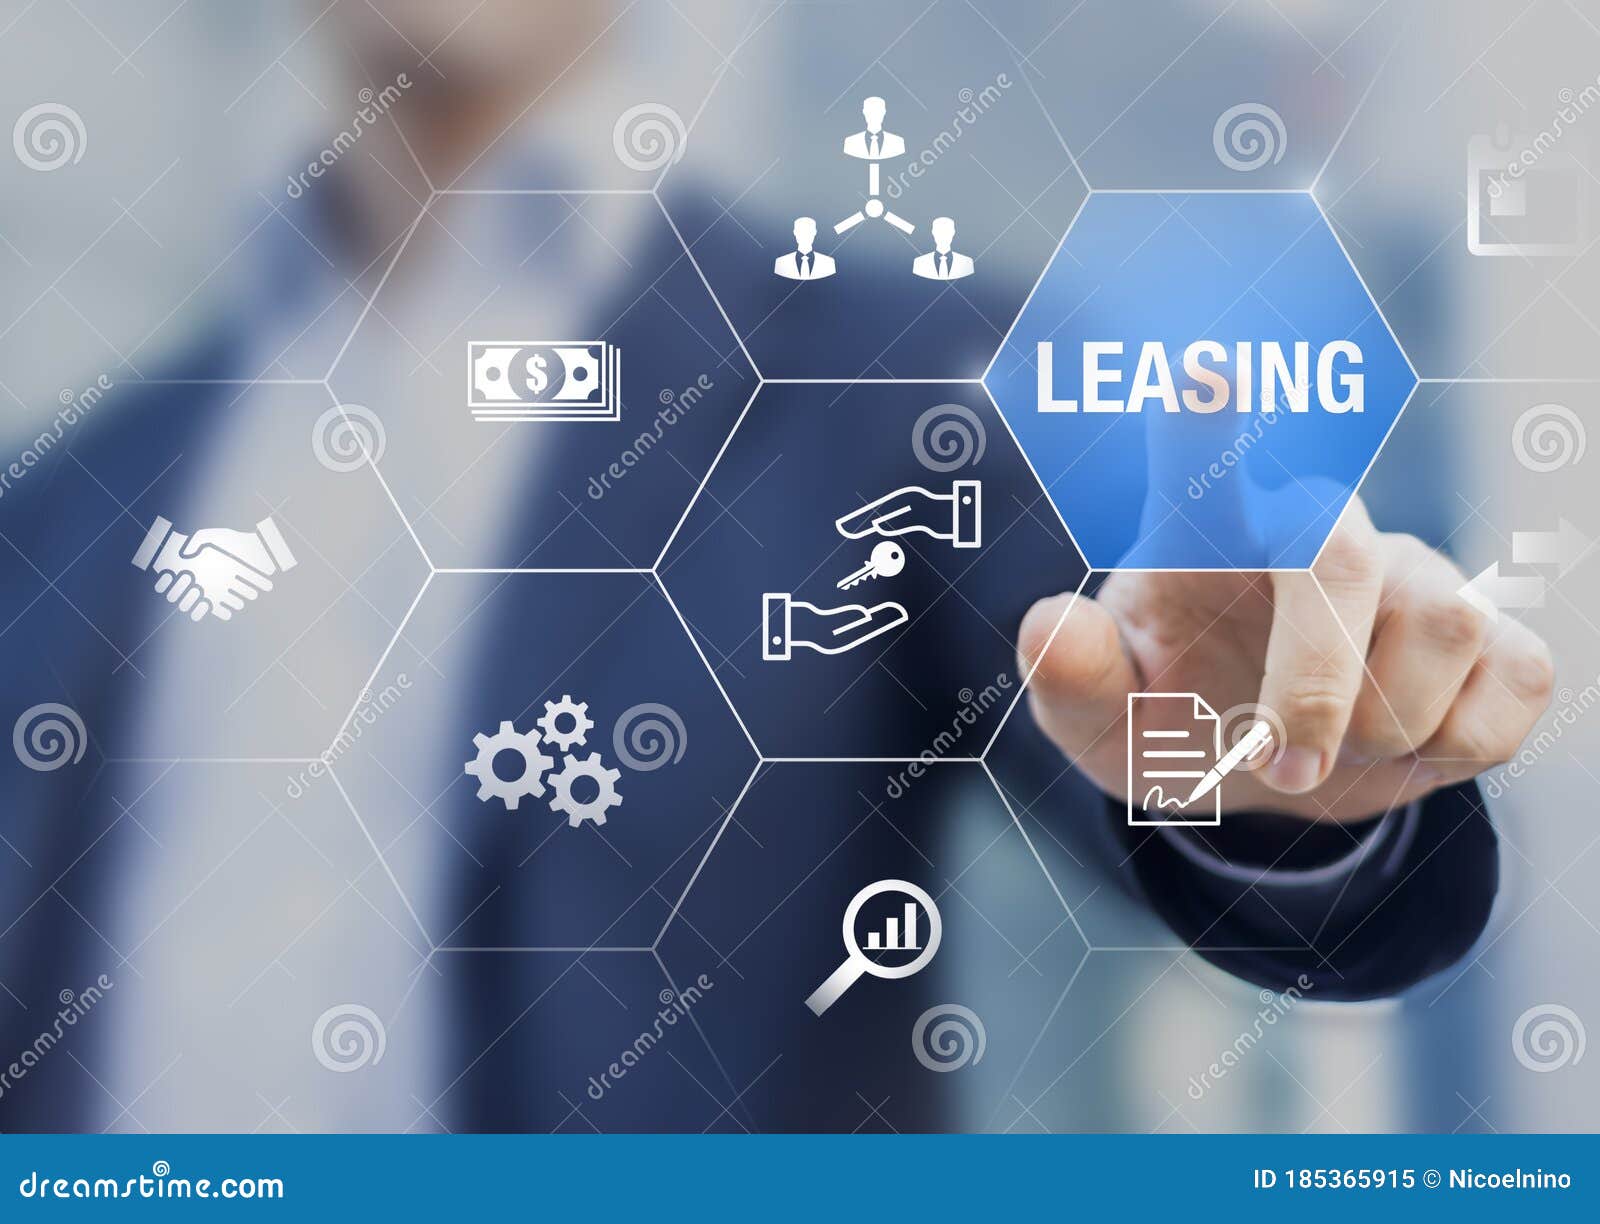 leasing business concept with icons about contract agreement between lessee and lessor over the rent of an asset as car, vehicle,